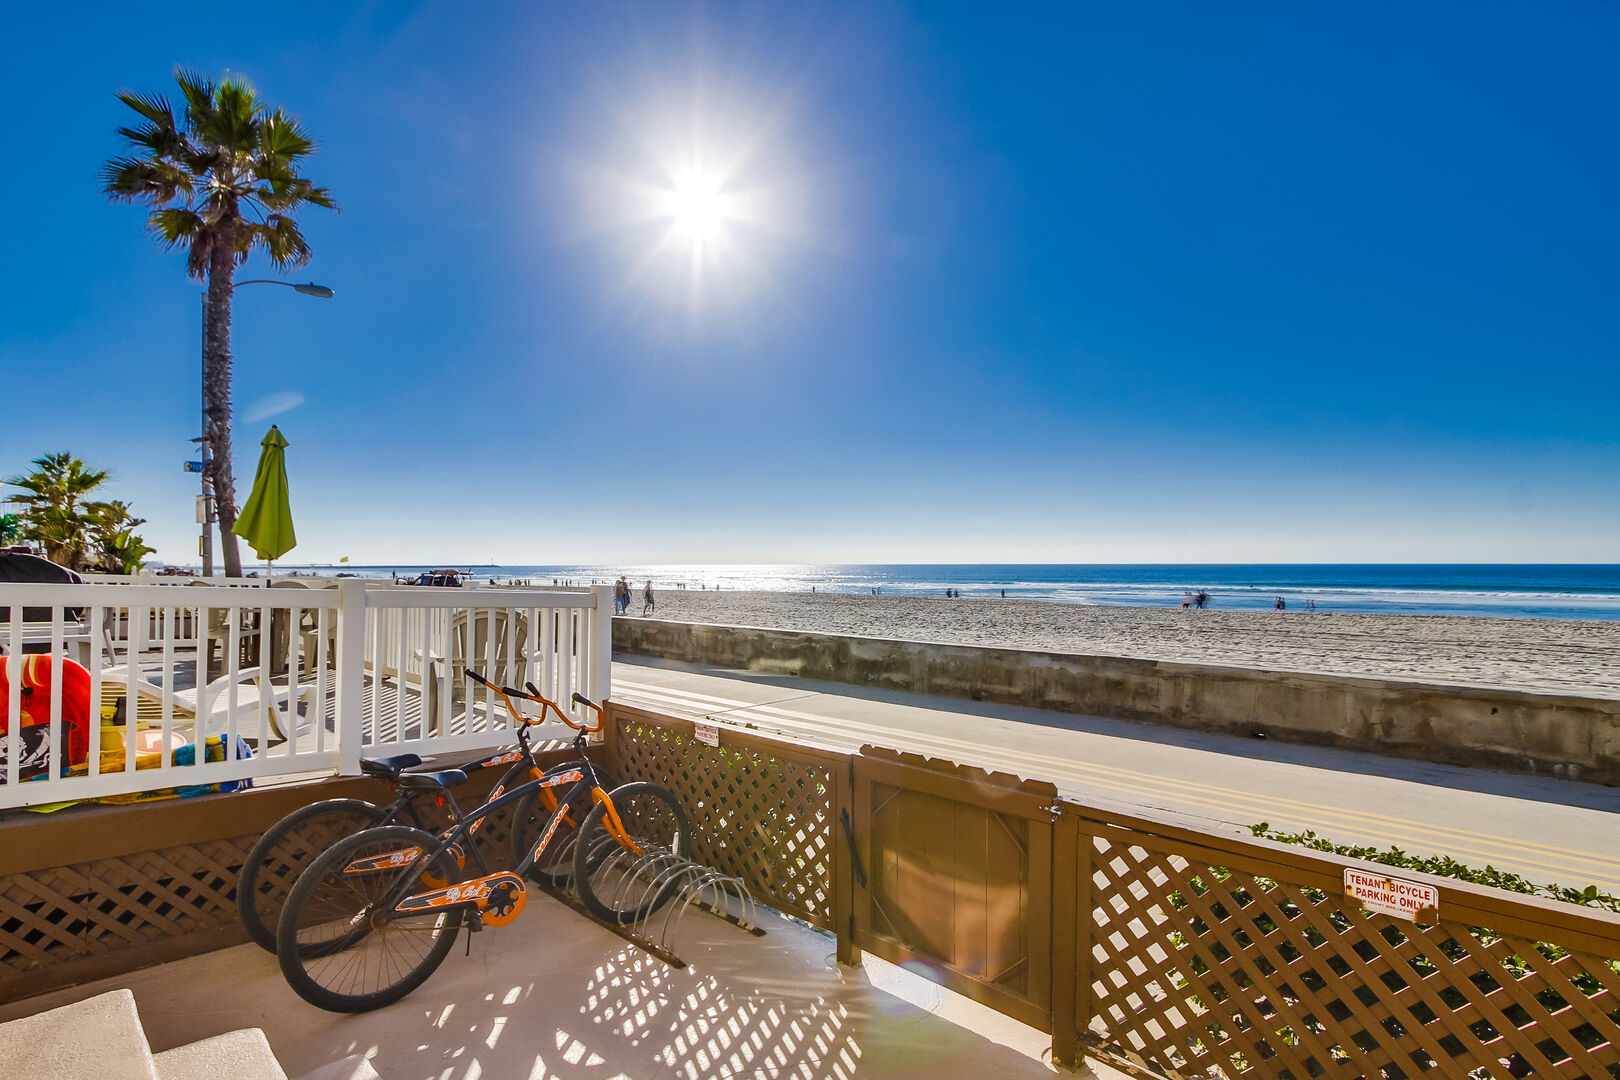 We provide 2 beach cruisers for your stay